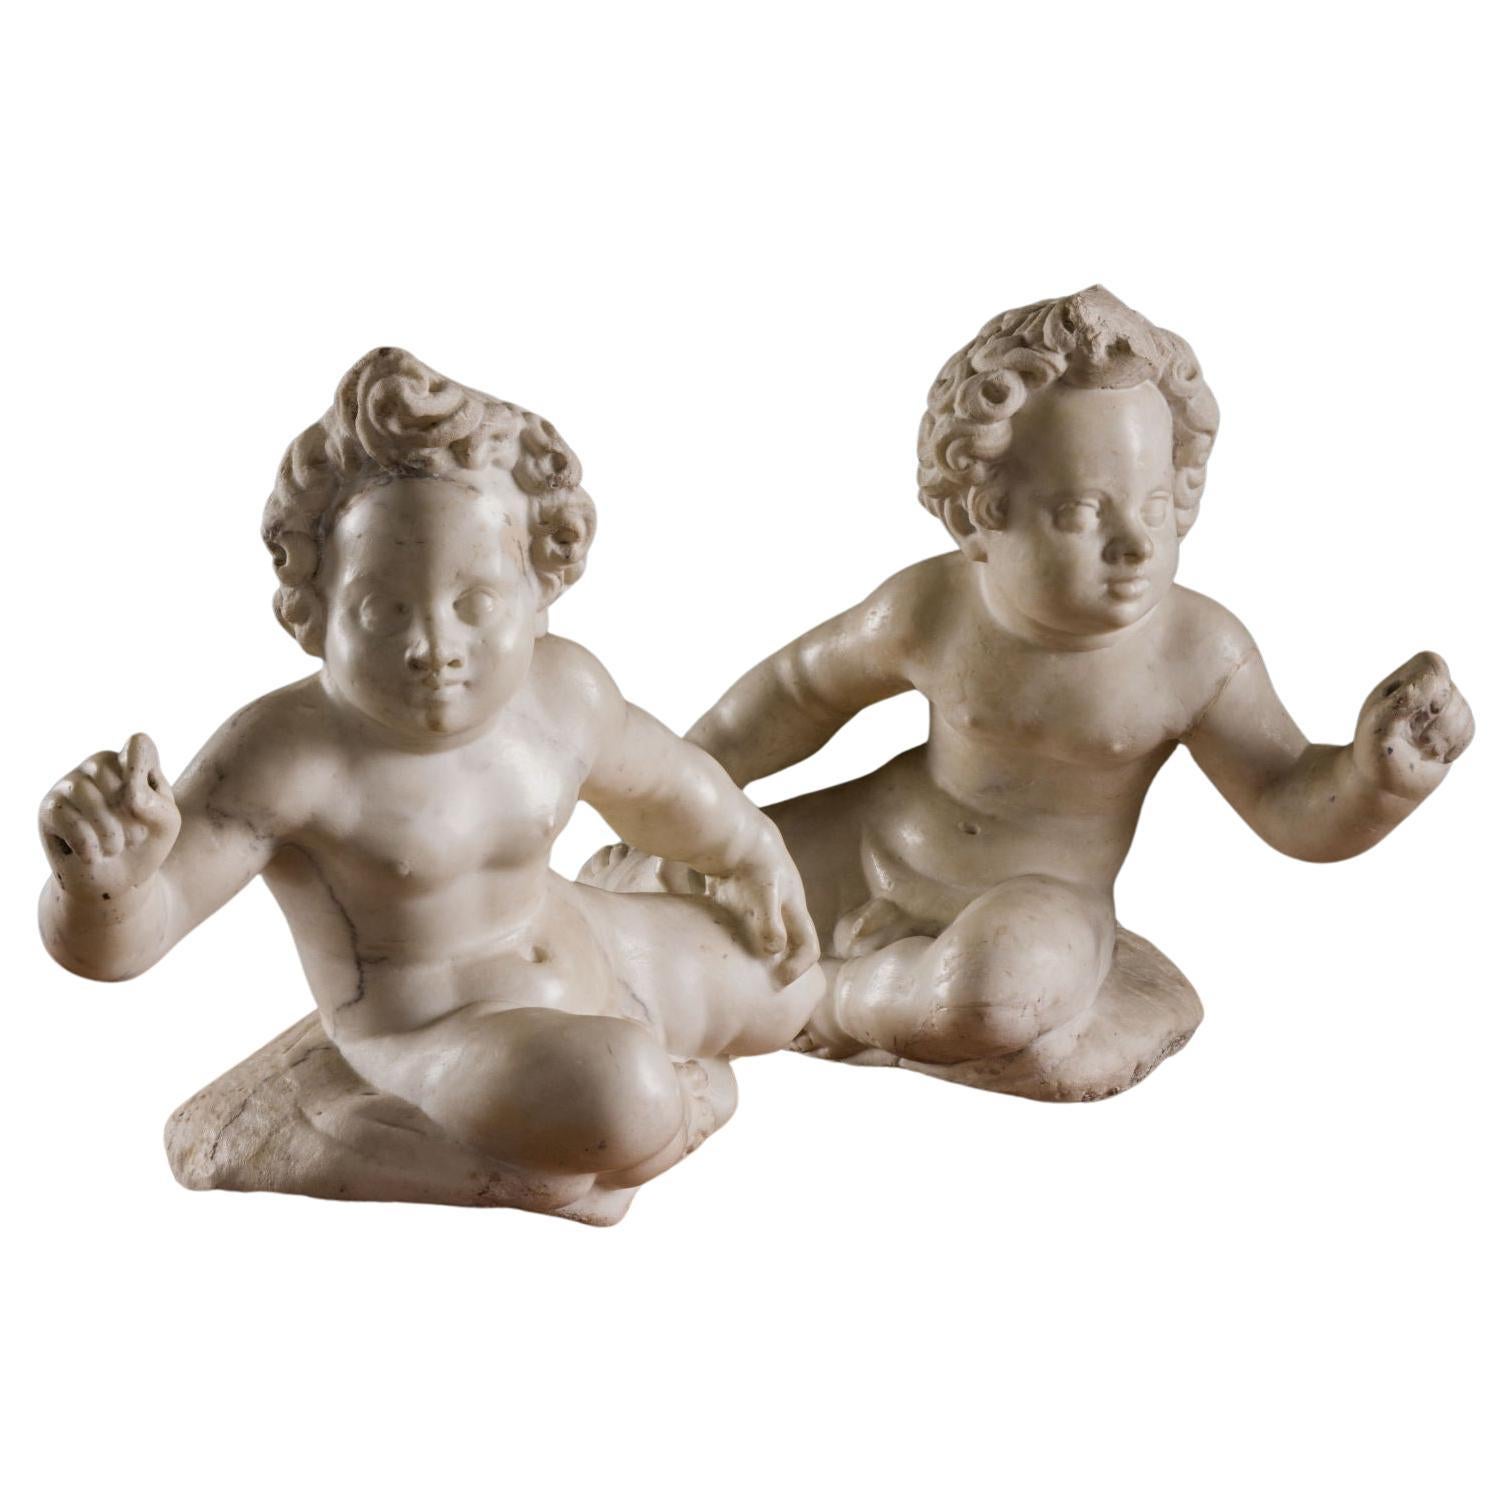 Two Putti, c. 1640-1650. Giovanni Pietro and Carlo Carra (workshop of)